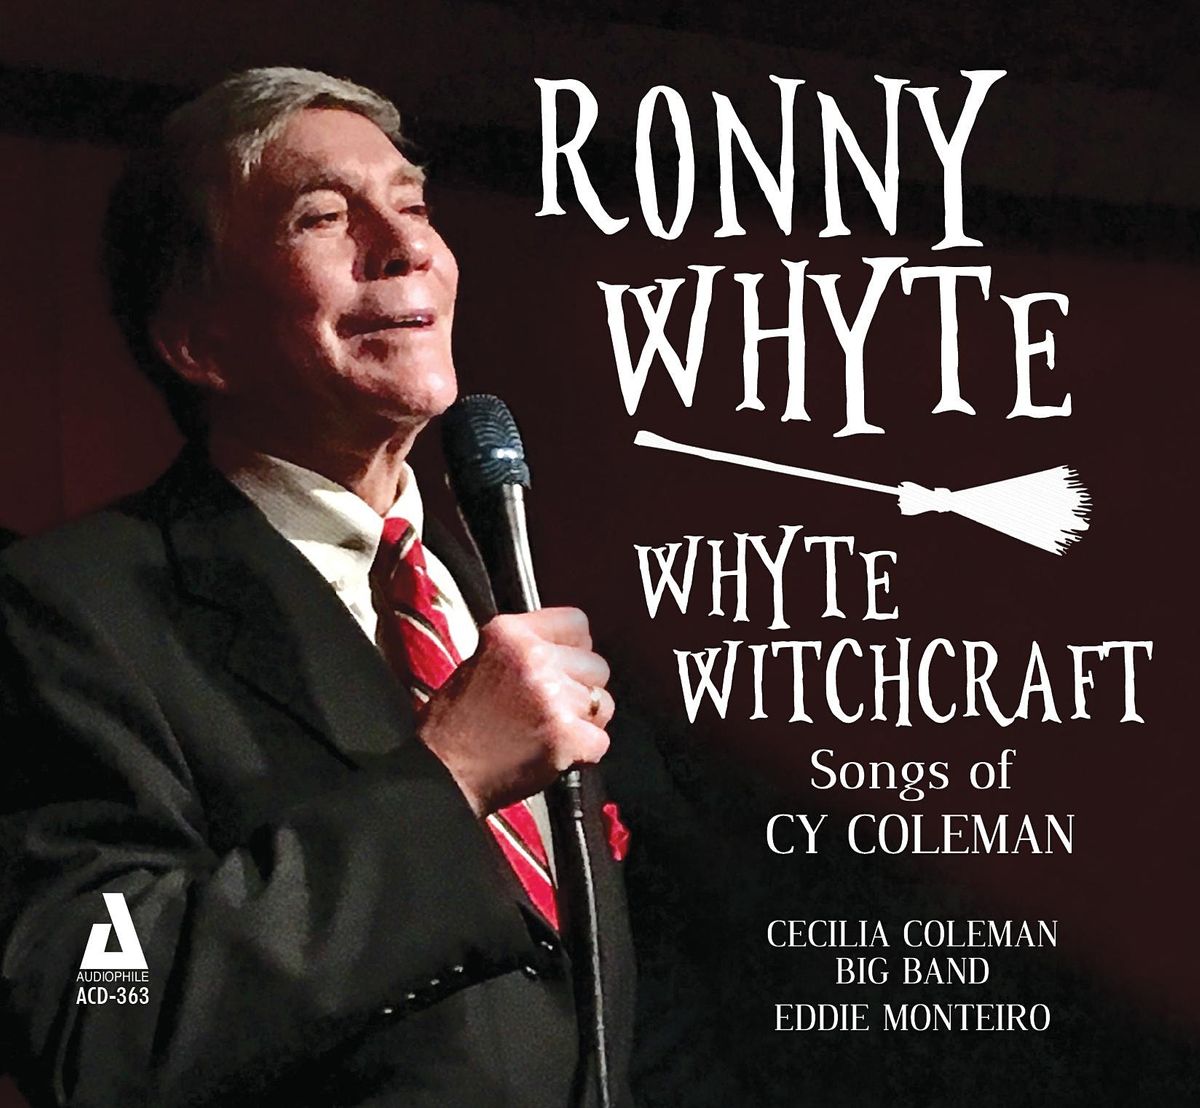 Ronny Whyte: Whyte Witchcraft, The Songs of Cy Coleman